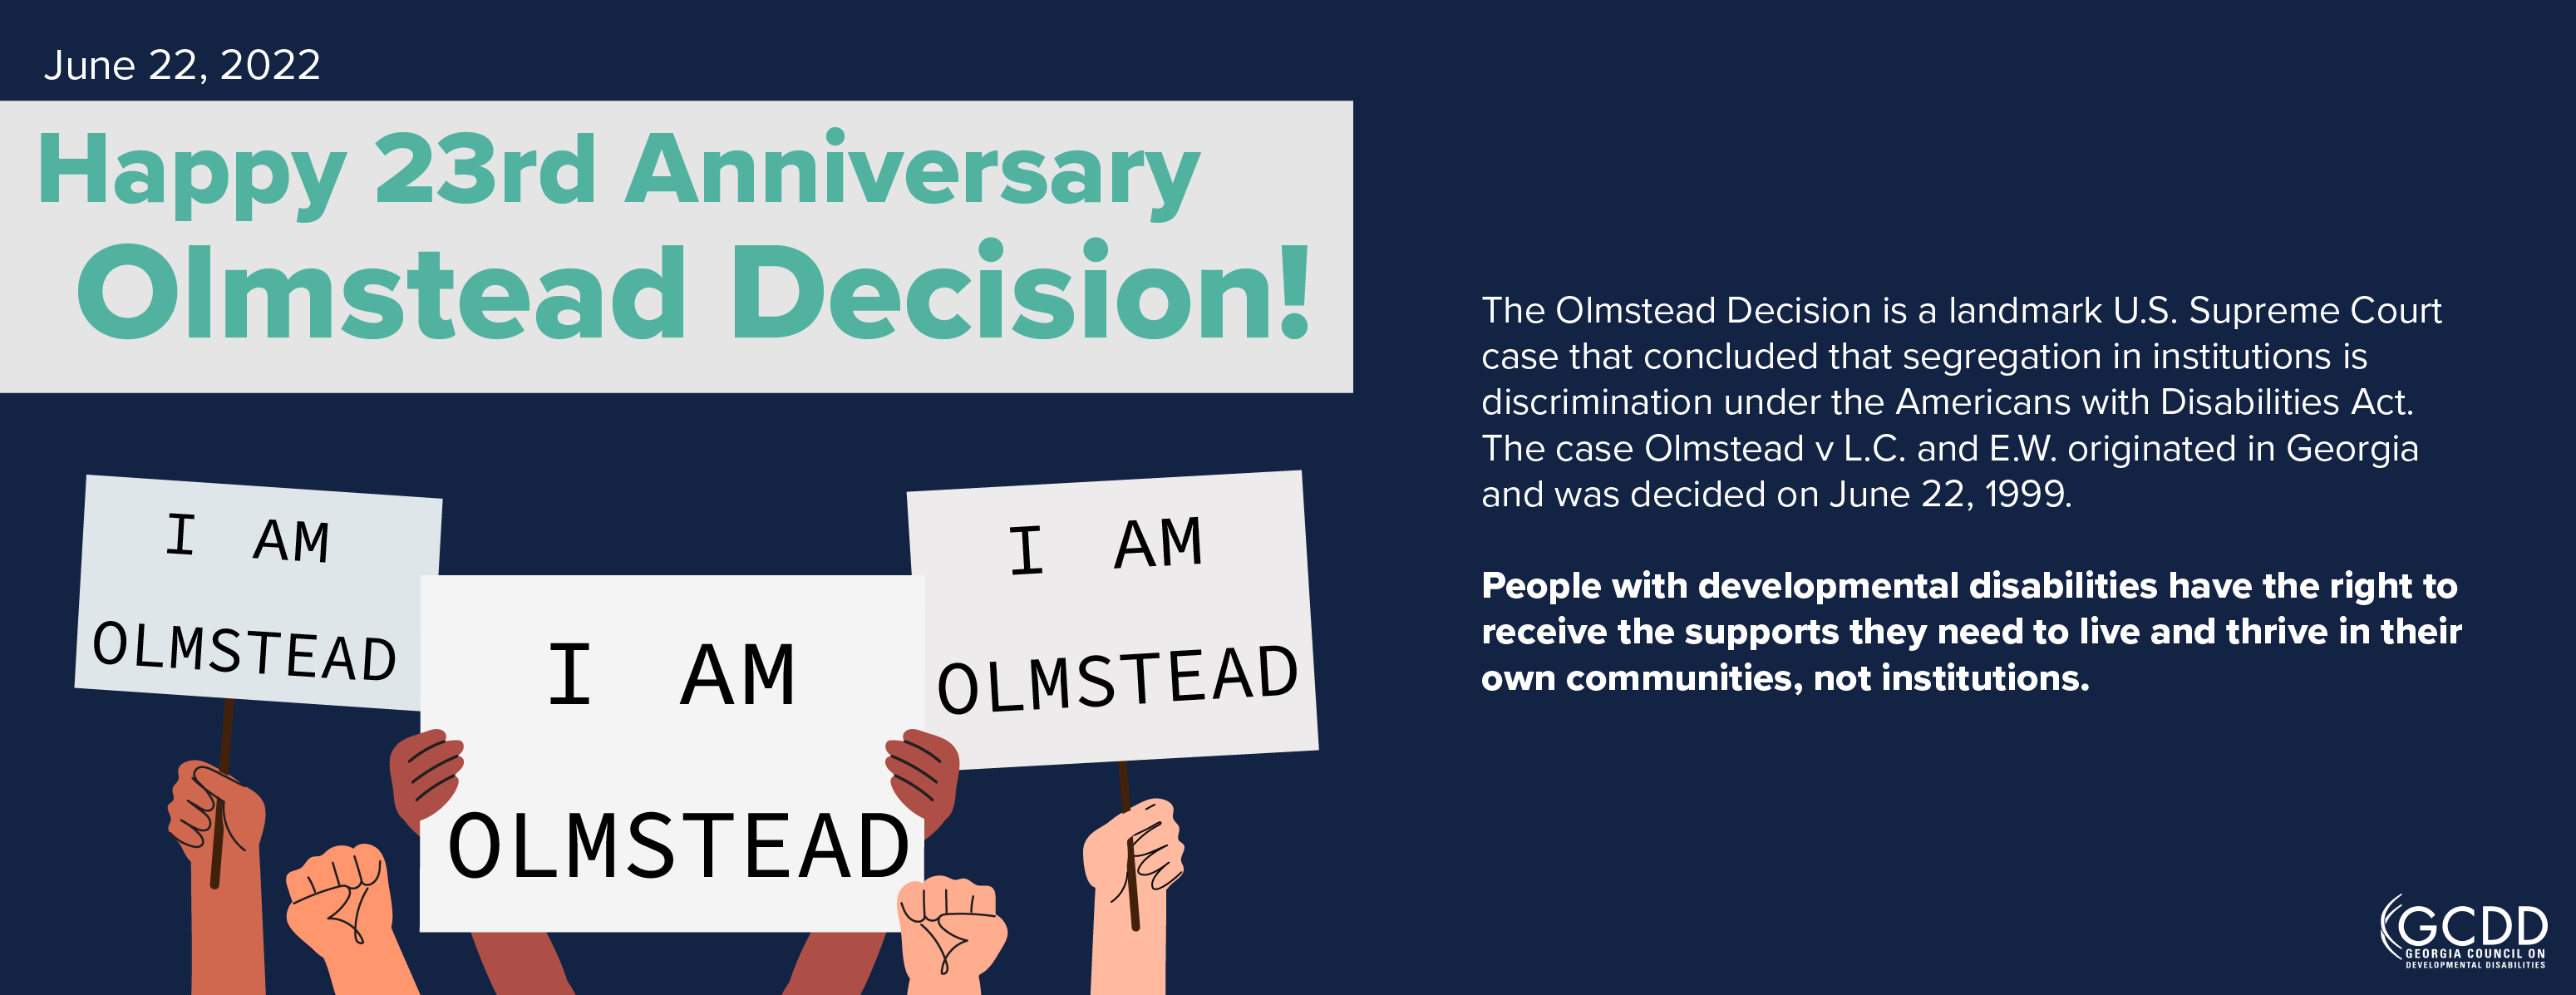 Happy 23rd Anniversary The Olmstead Decision is a landmark U.S. Supreme Court case that concluded that segregation in institutions is discrimination under the Americans with Disabilities Act. The case Olmstead v L.C. and E.W. originated in Georgia and was decided on June 22, 1999.  People with developmental disabilities have the right to receive the supports they need to live and thrive in their own communities, not institutions.